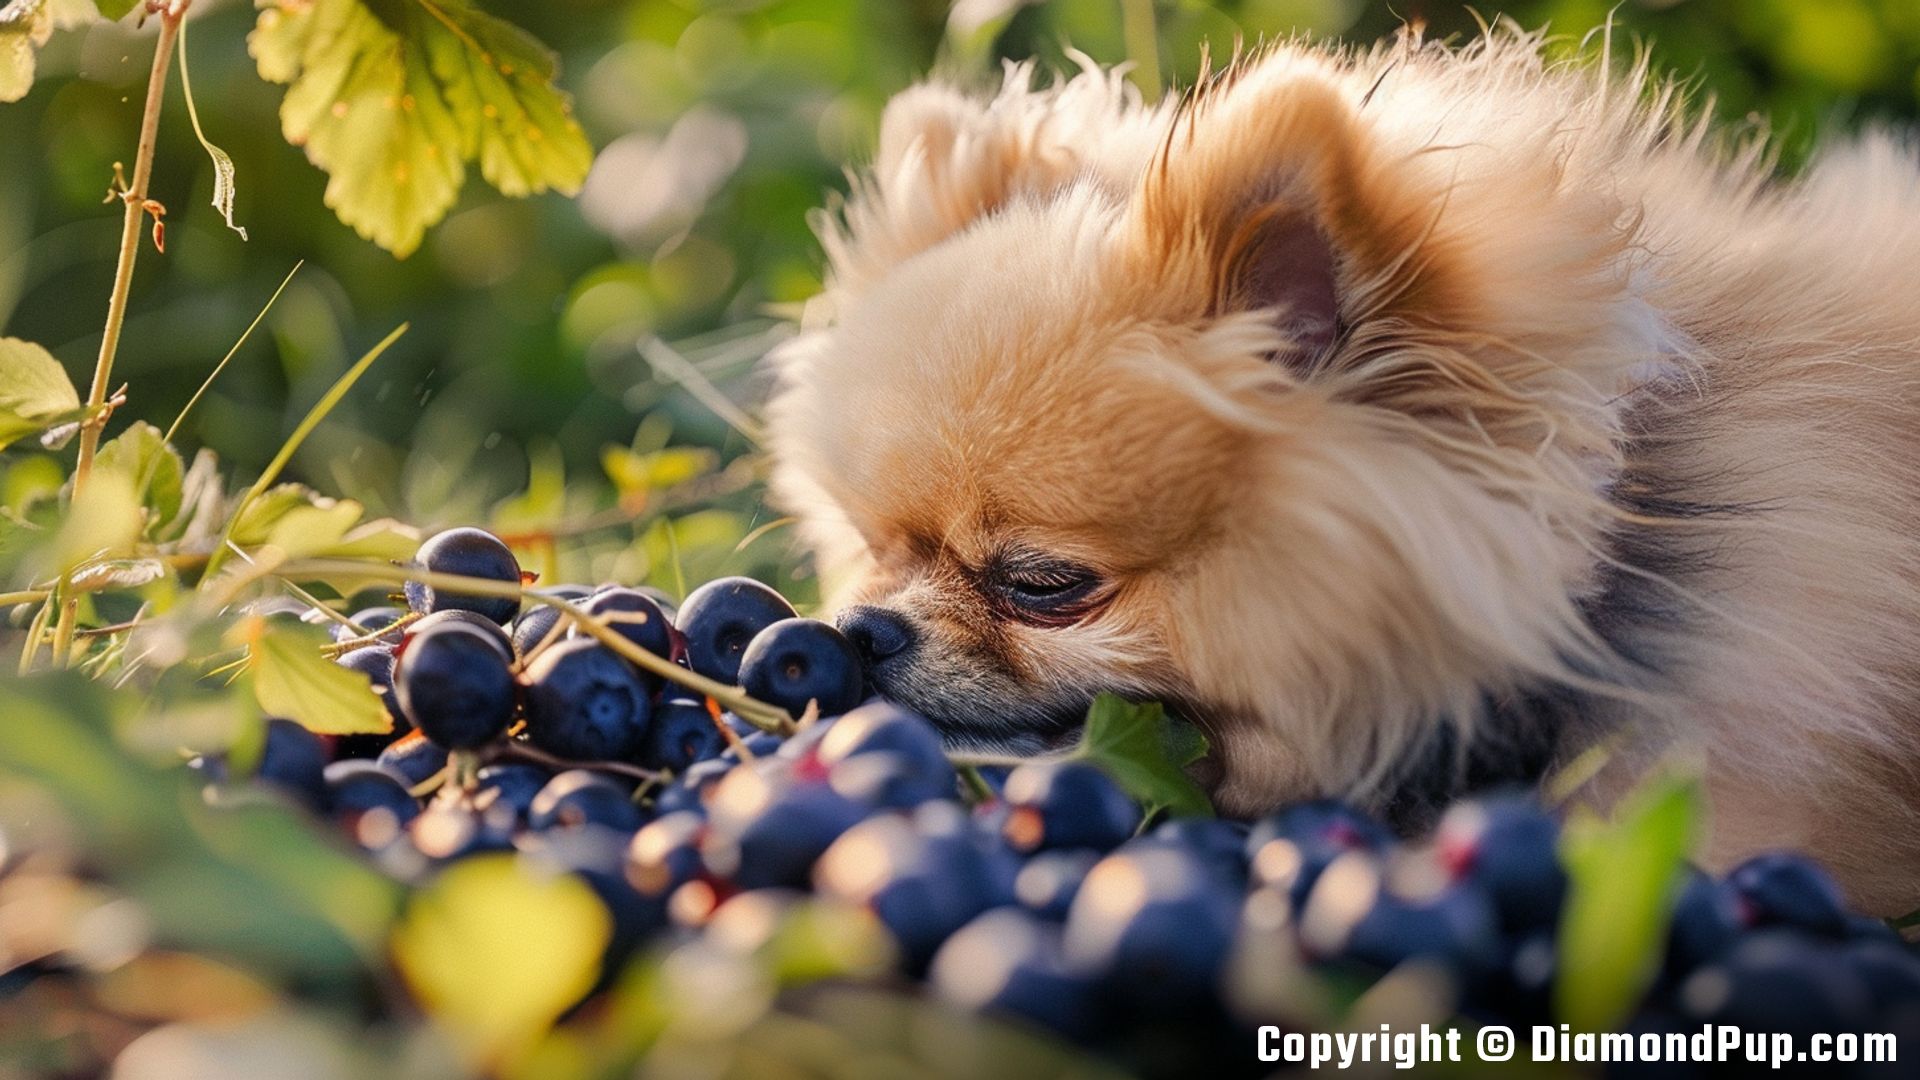 Photograph of a Happy Pomeranian Snacking on Blueberries